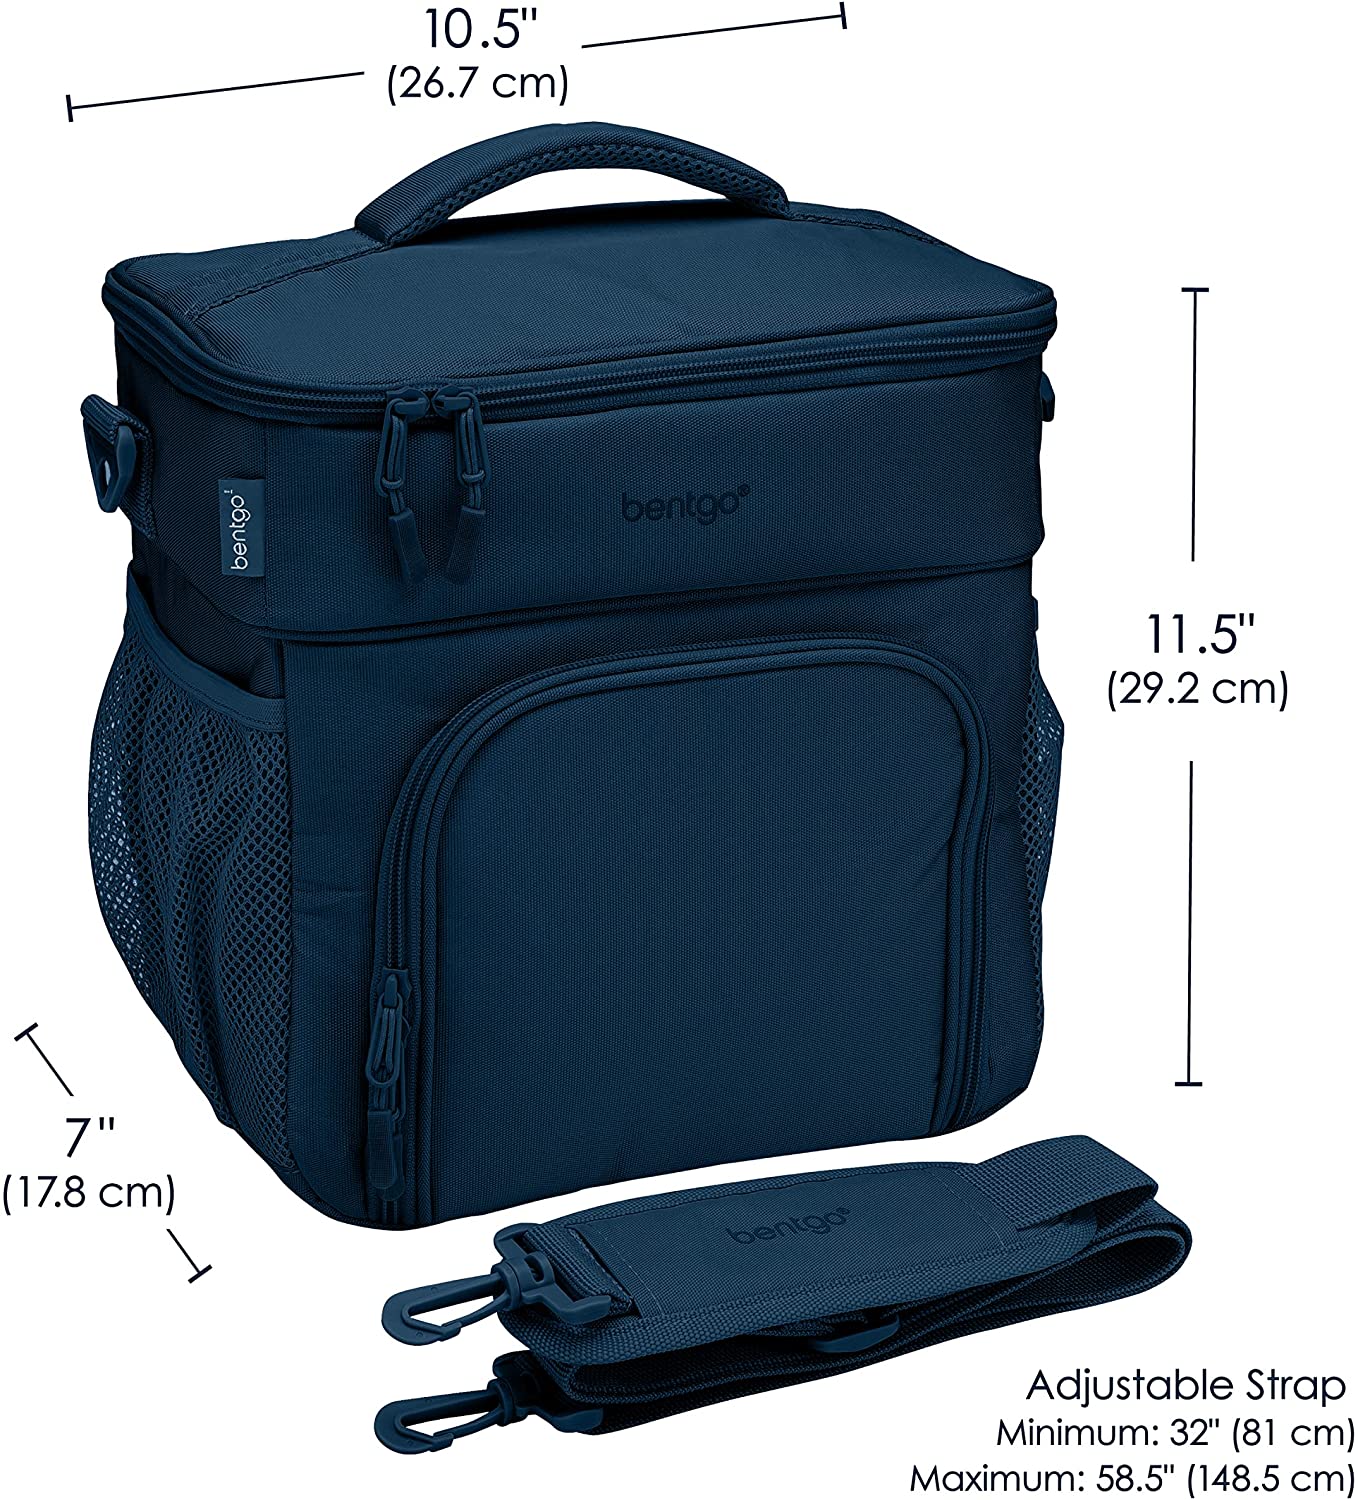 https://bigbigmart.com/wp-content/uploads/2022/07/Bentgo%C2%AE-Prep-Deluxe-Multimeal-Bag-Premium-Insulation-up-to-8-Hrs-with-Water-Resistant-Exterior-Interior-Extra-Large-Lunch-Bag-Holds-4-Meals-Snacks-Great-for-All-Day-Meal-Prep-Navy-Blue8.jpg